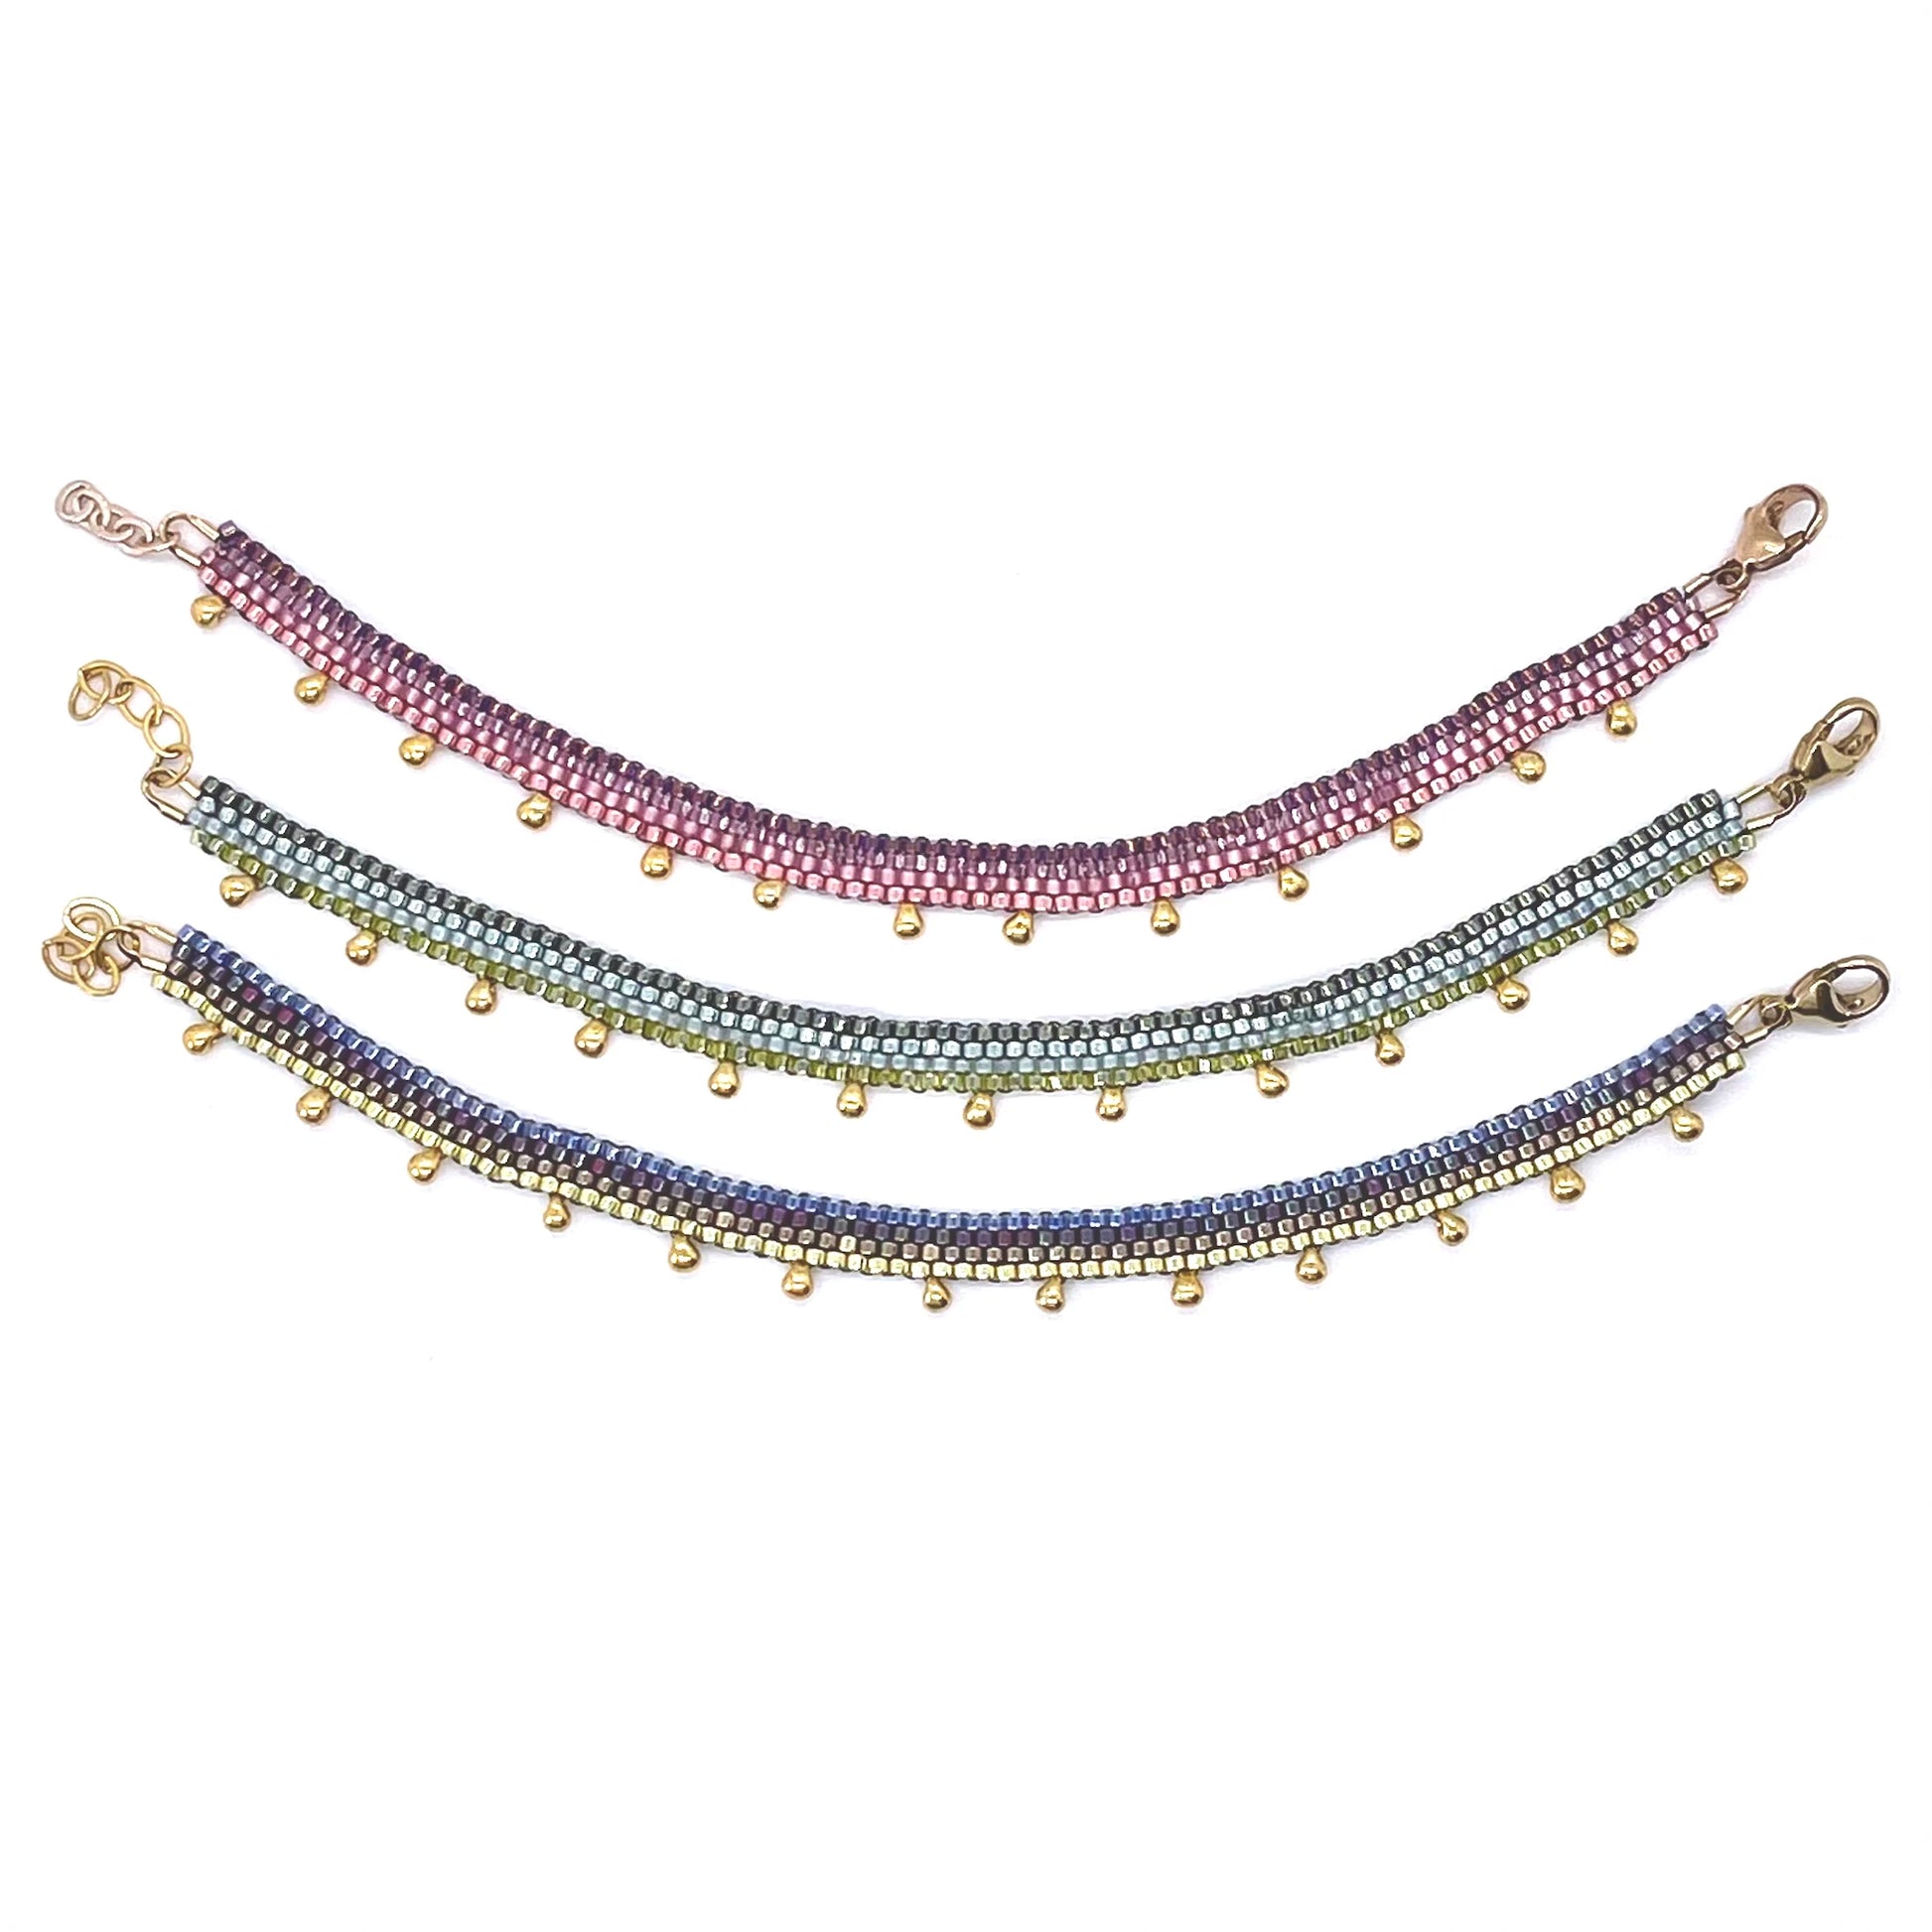 Metallic seed bead anklets with gold drop beads and pink, green, purple and blue stripes. Peyote stitch handwoven in NYC. 